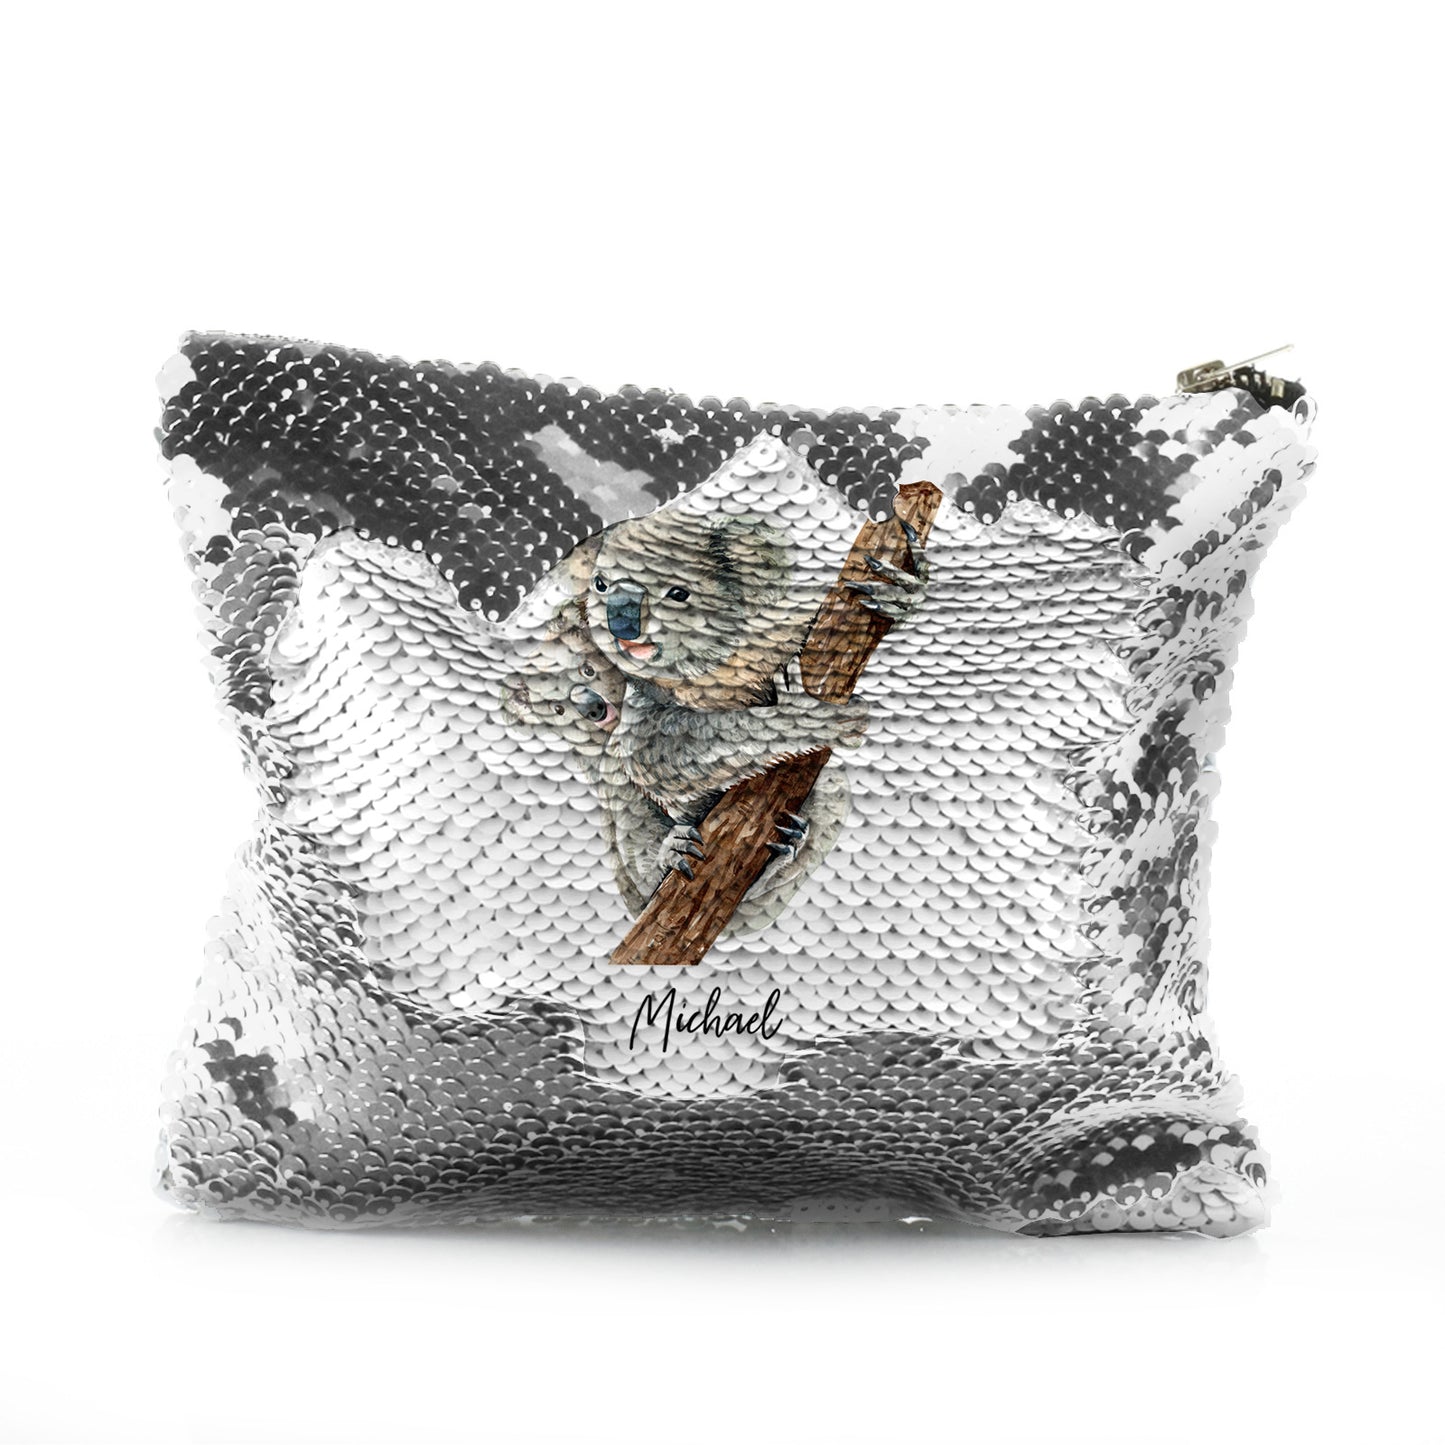 Personalised Sequin Zip Bag with Welcoming Text and Climbing Mum and Baby Koalas